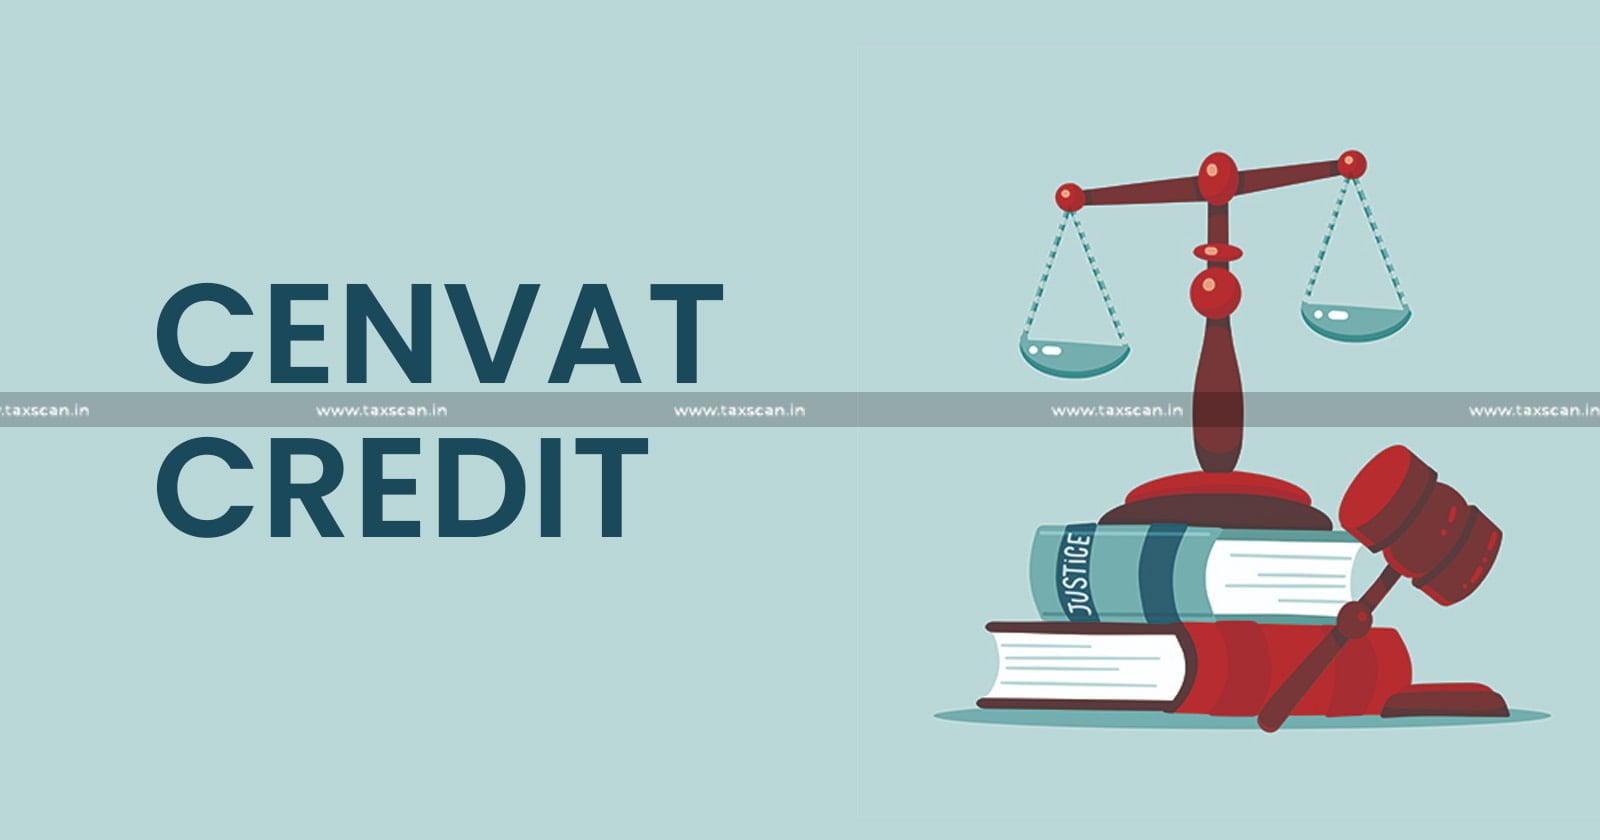 Discharge of Service Tax - Service Tax - Output Service - Output Service of Repair - Maintenance of Equipment - CENVAT Credit - CESTAT - Service Provider is Eligible to Avail CENVAT Credit - Taxscan